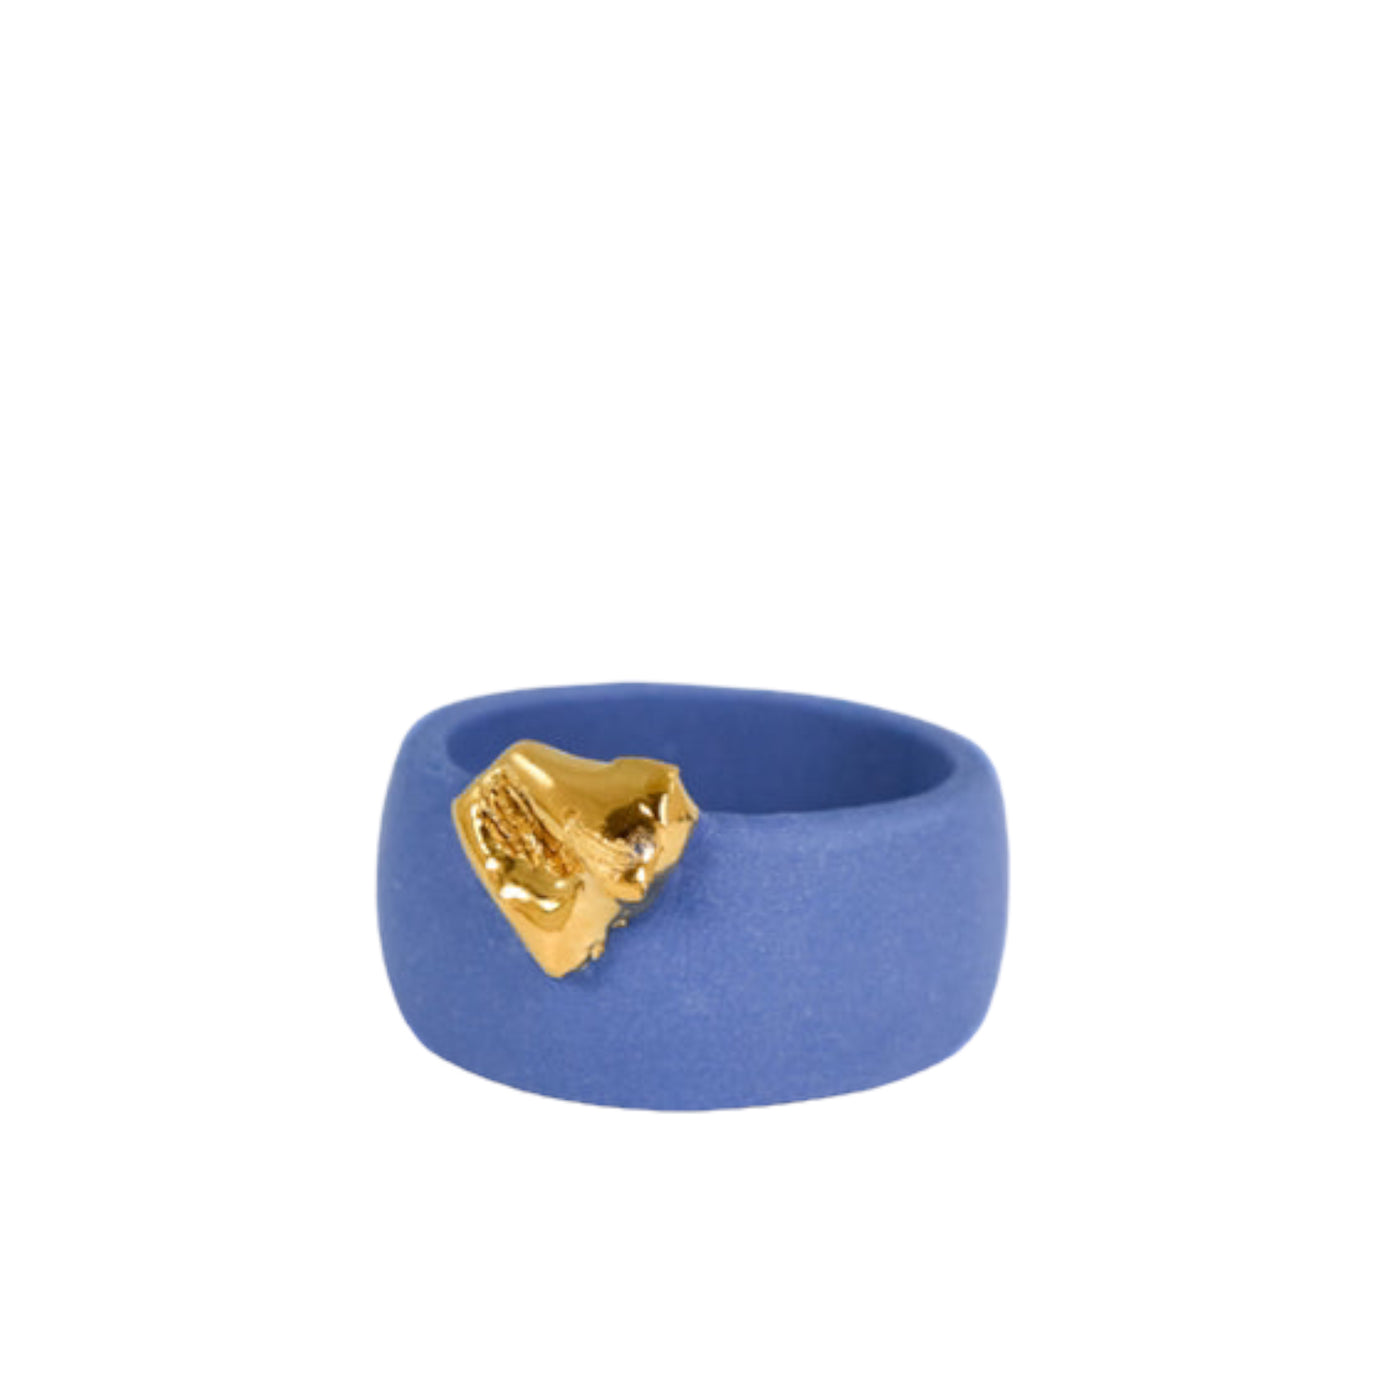 "Aubrey" Porcelain Ring With Gold